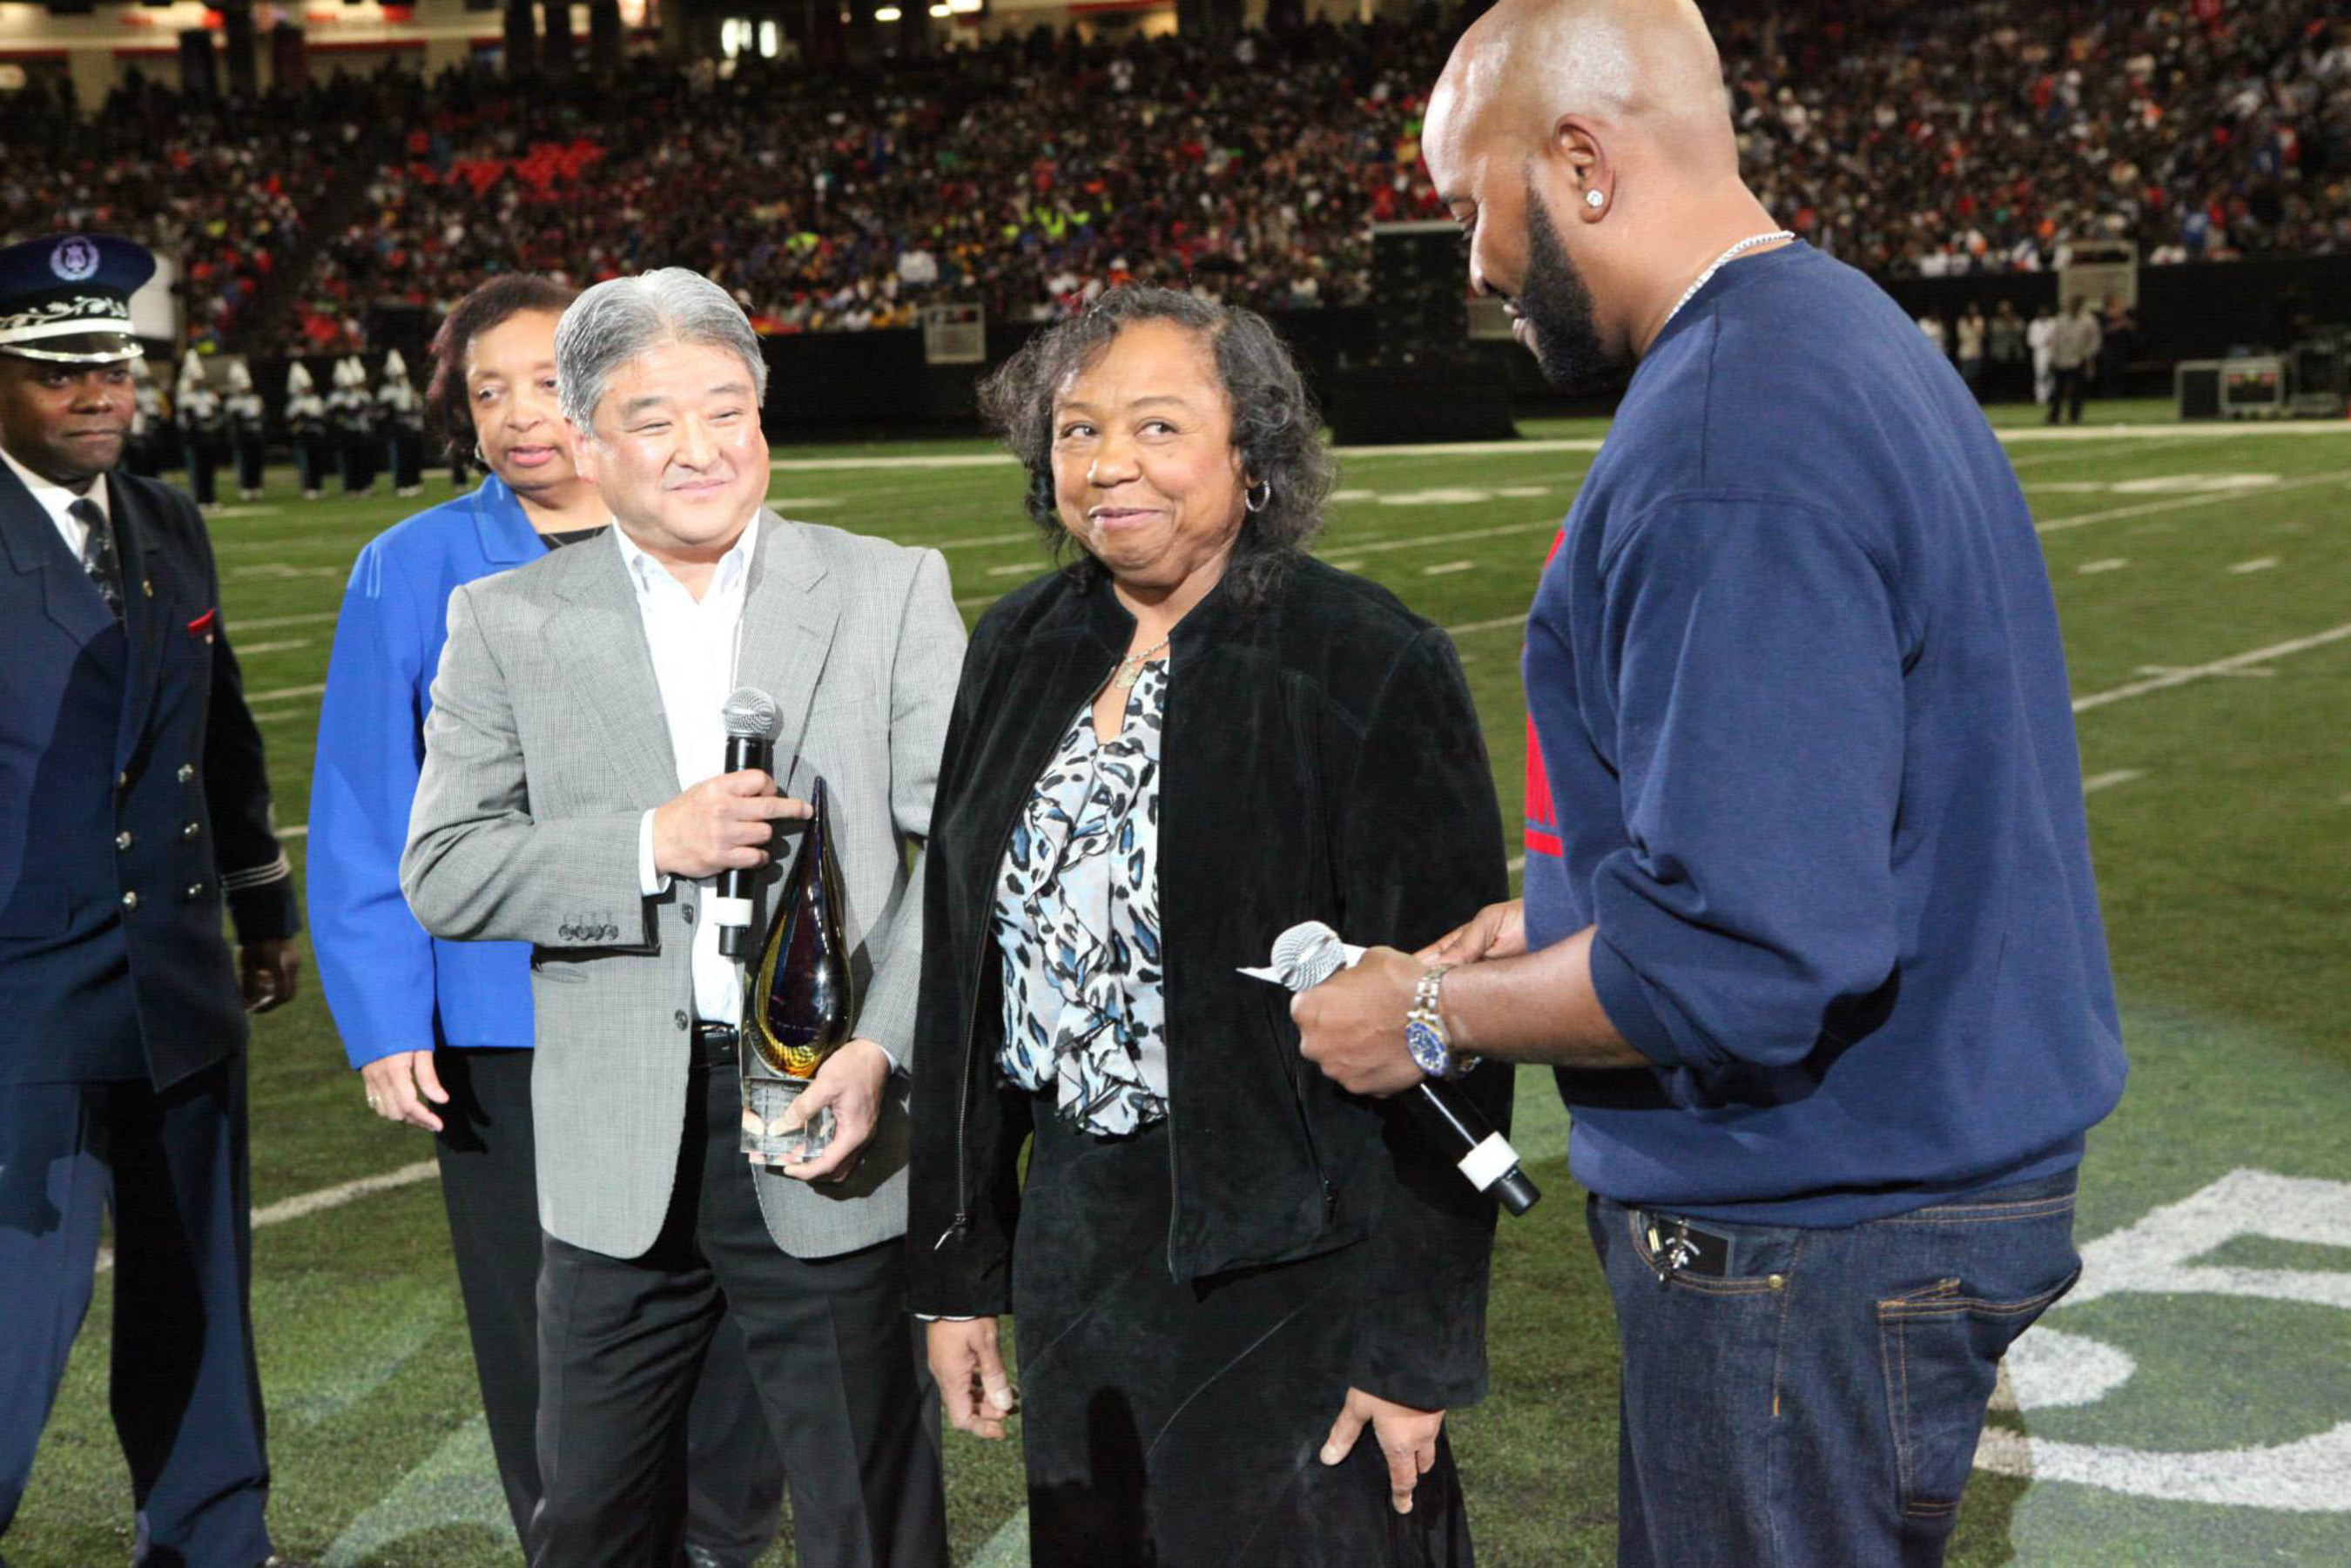 Ms. Audrey Stradford was named the first-ever Honda Power of Dreams Award honoree for her lifelong dedication to serving HBCU students and the Tennessee State University community, and was awarded a brand new 2015 Honda CRV at the 13th annual Honda Battle of the Bands Invitational Showcase on Jan. 24, 2015.